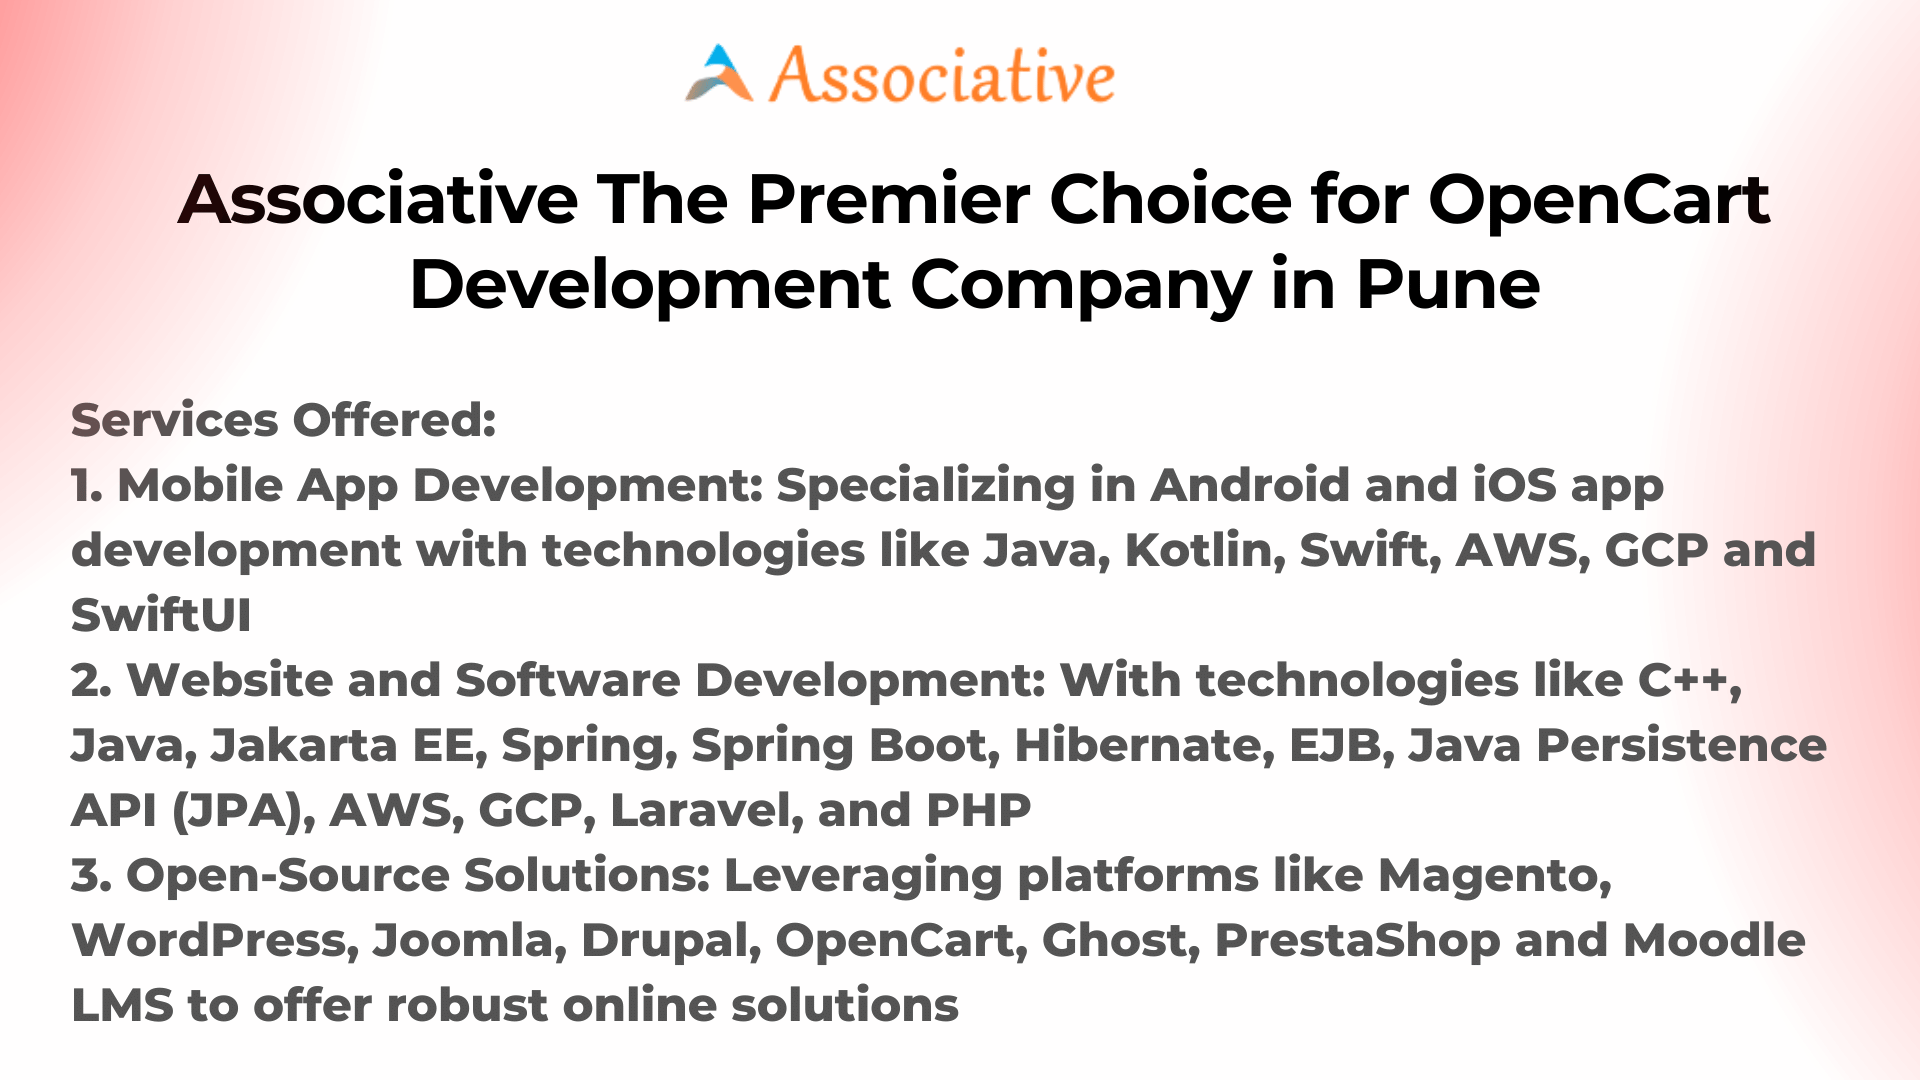 Associative The Premier Choice for OpenCart Development Company in Pune